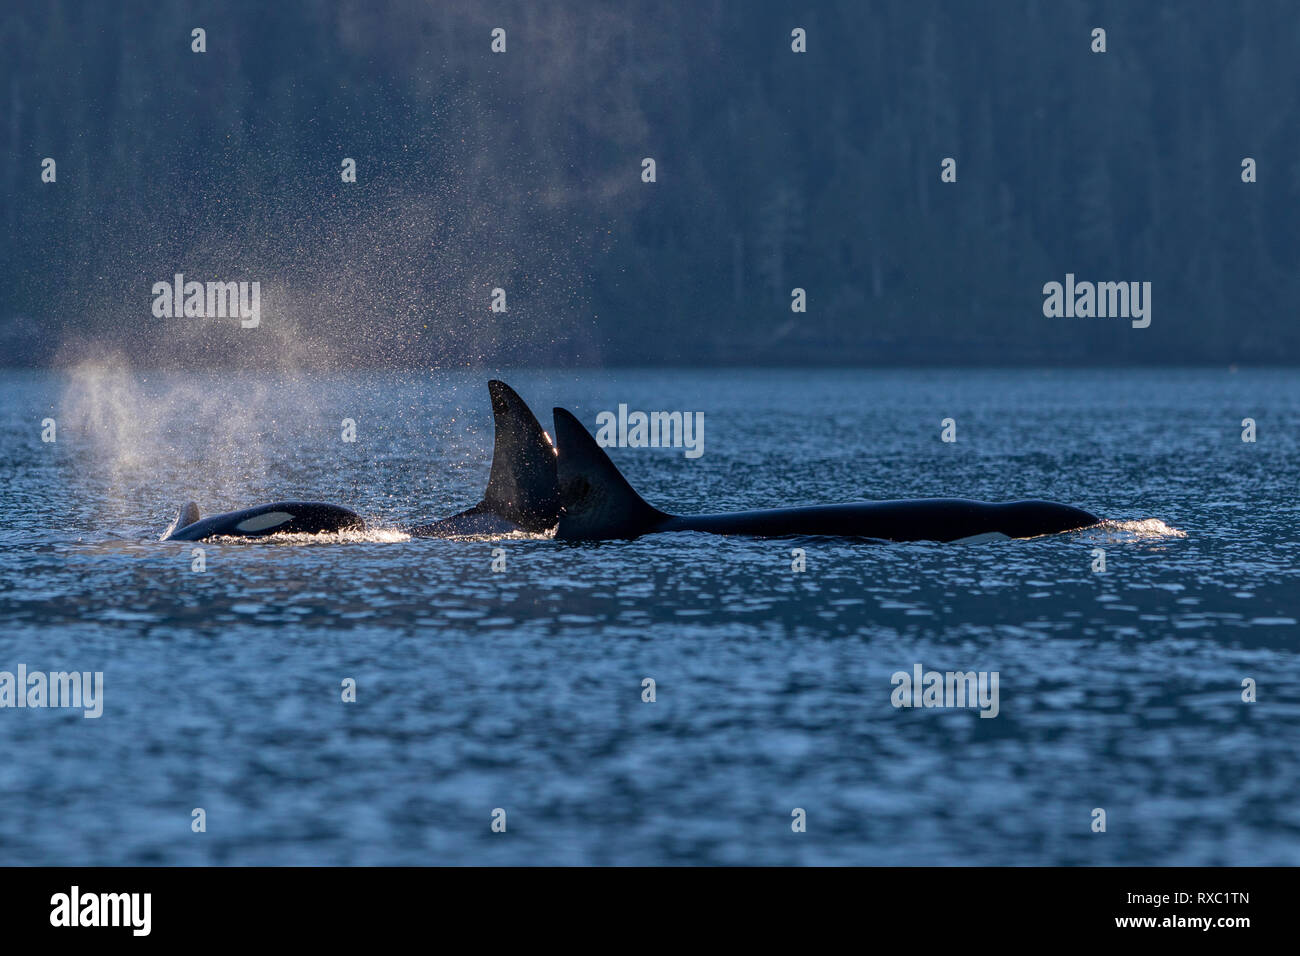 Northern resident orca pod (killer whale, Orcinus orca) traveling through Johnstone Strait off northern Vancouver Island in late afternoon, British Columbia, Canada Stock Photo